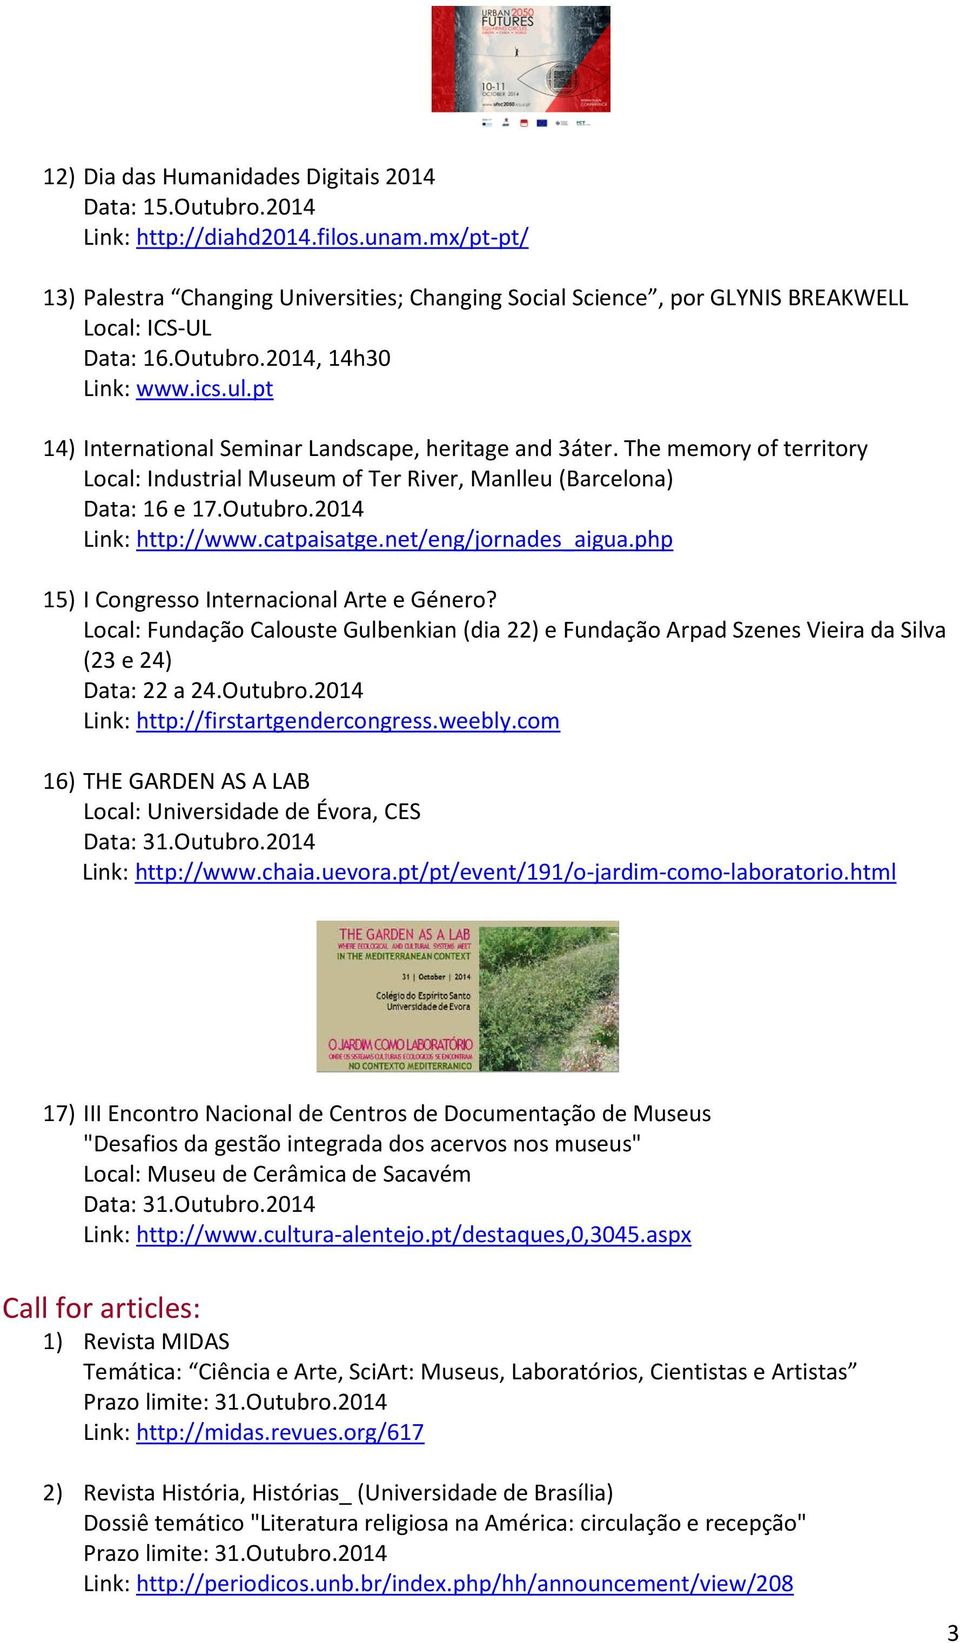 pt 14) International Seminar Landscape, heritage and 3áter. The memory of territory Local: Industrial Museum of Ter River, Manlleu (Barcelona) Data: 16 e 17.Outubro.2014 Link: http://www.catpaisatge.